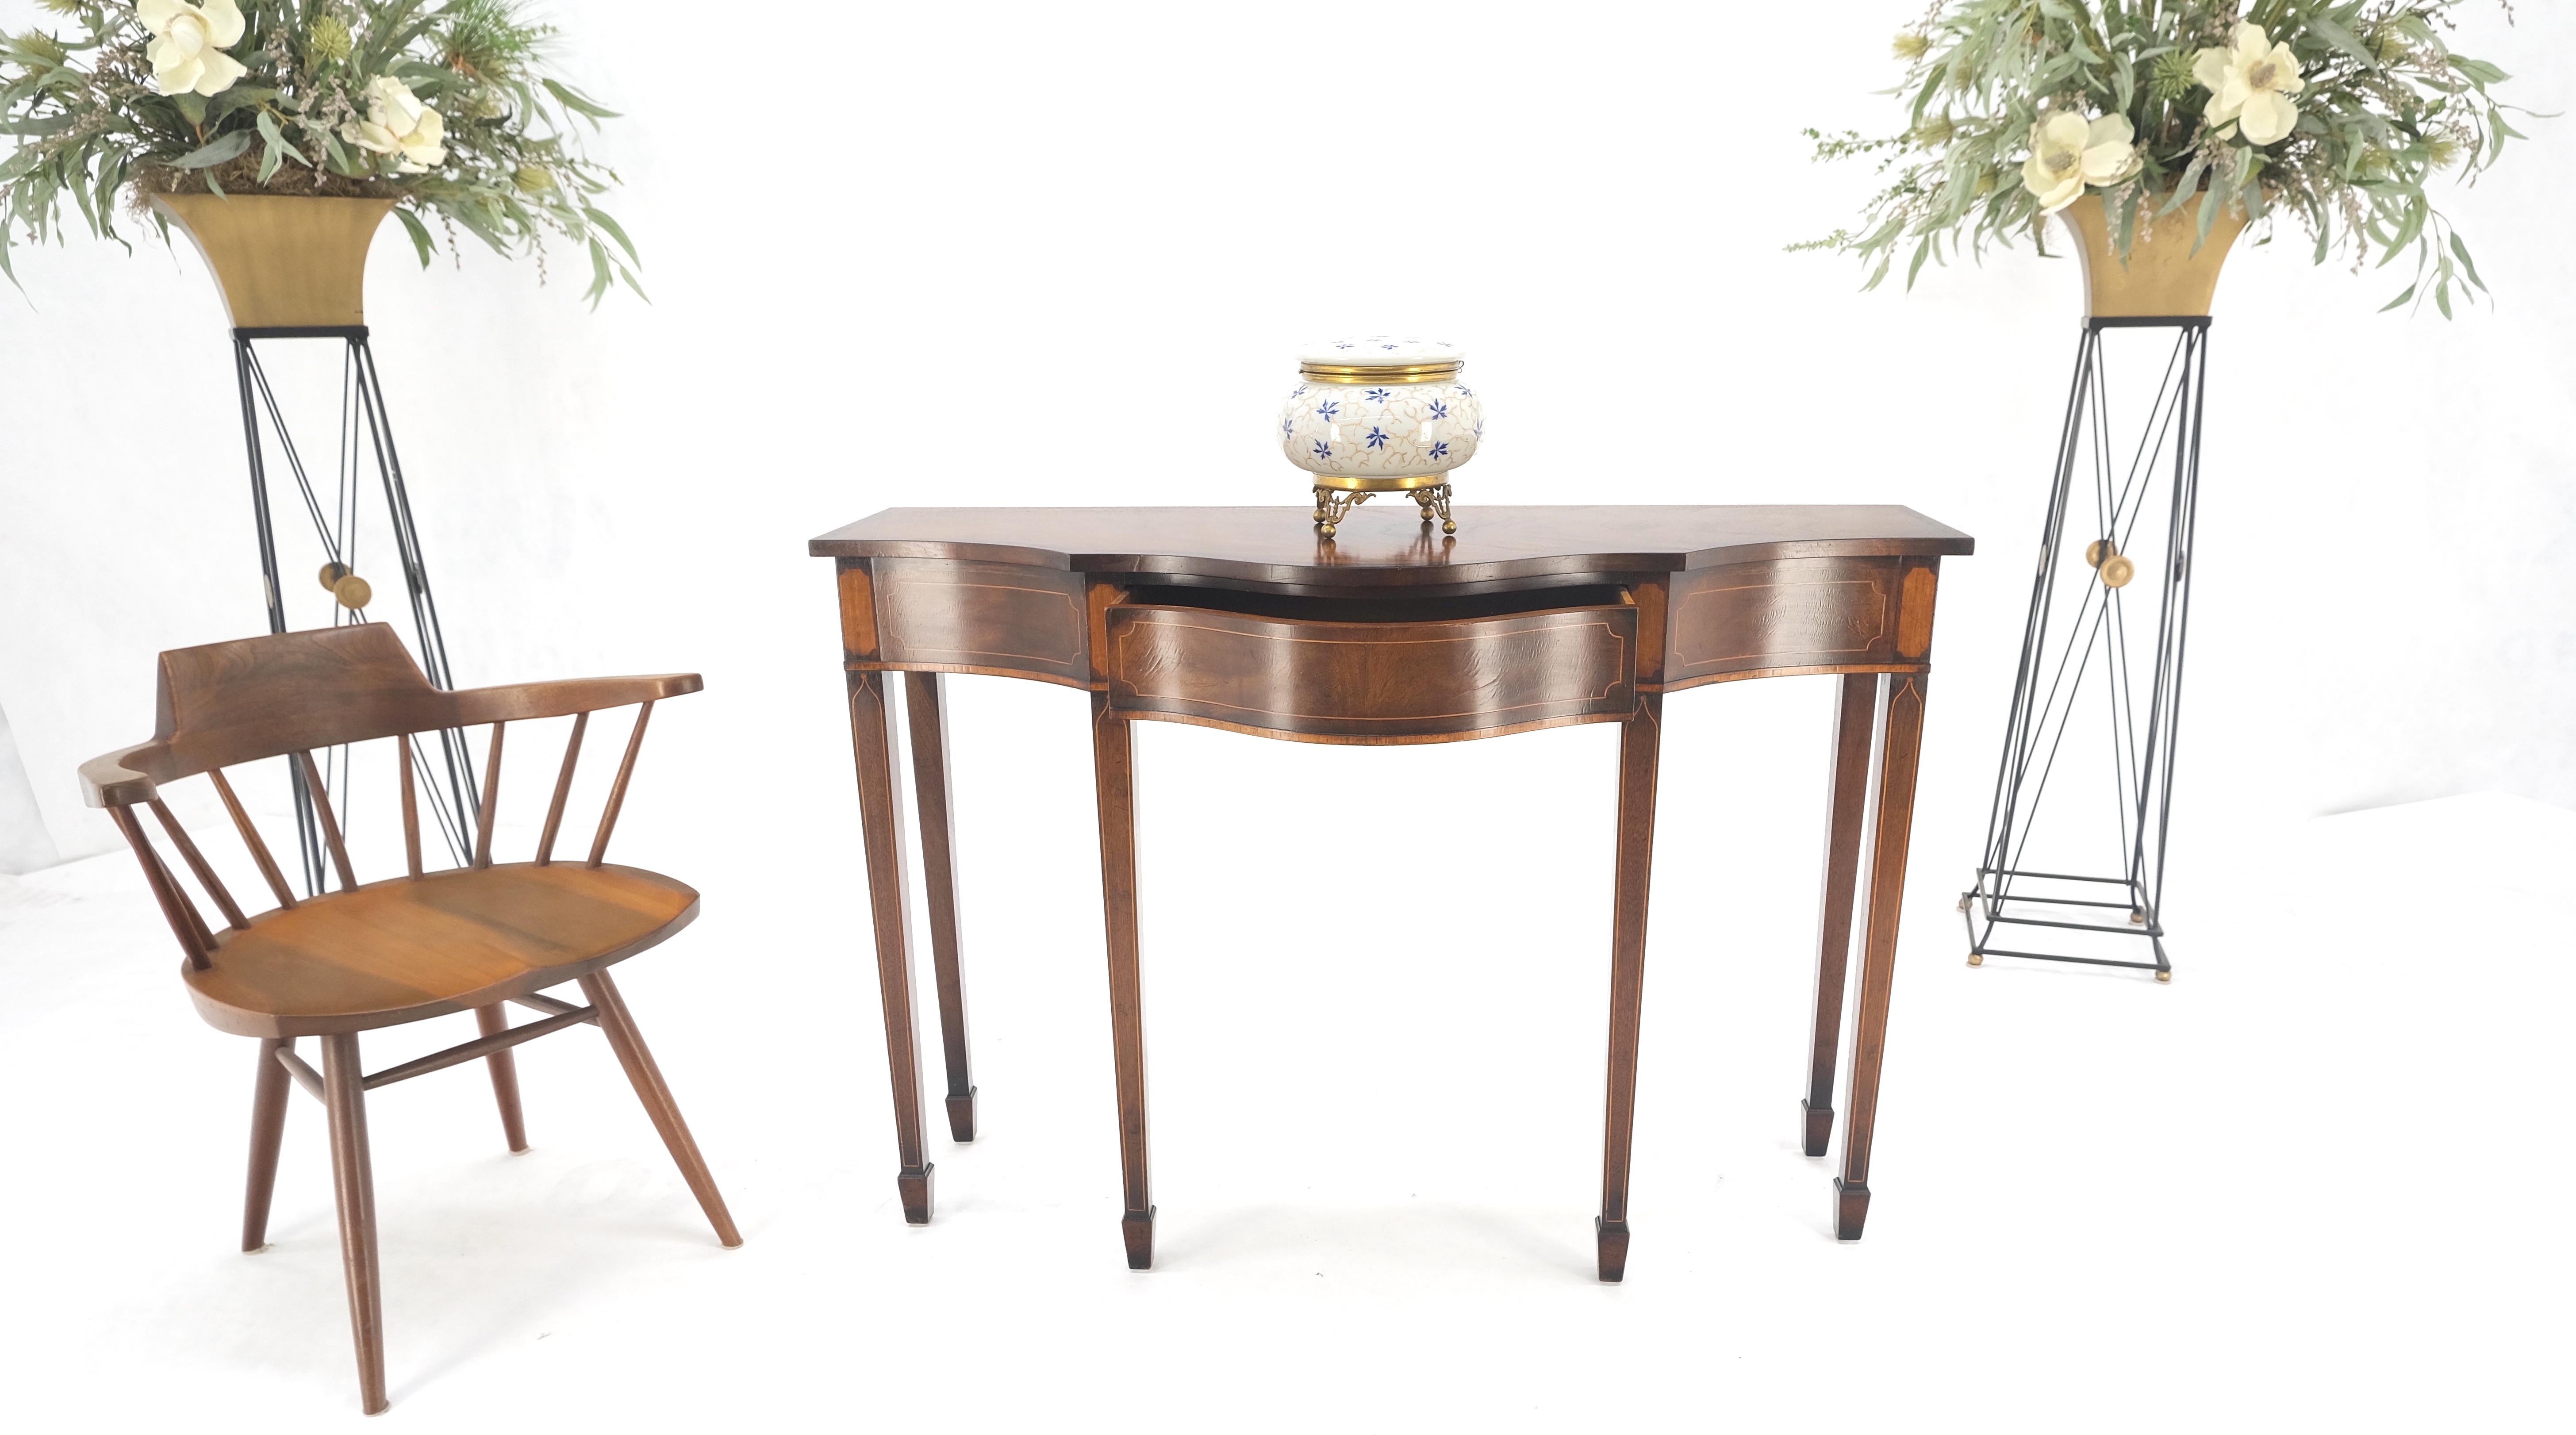 Table console à 6 pieds Federal Flame Mahogany Banded Serpentine Front MINT ! en vente 6